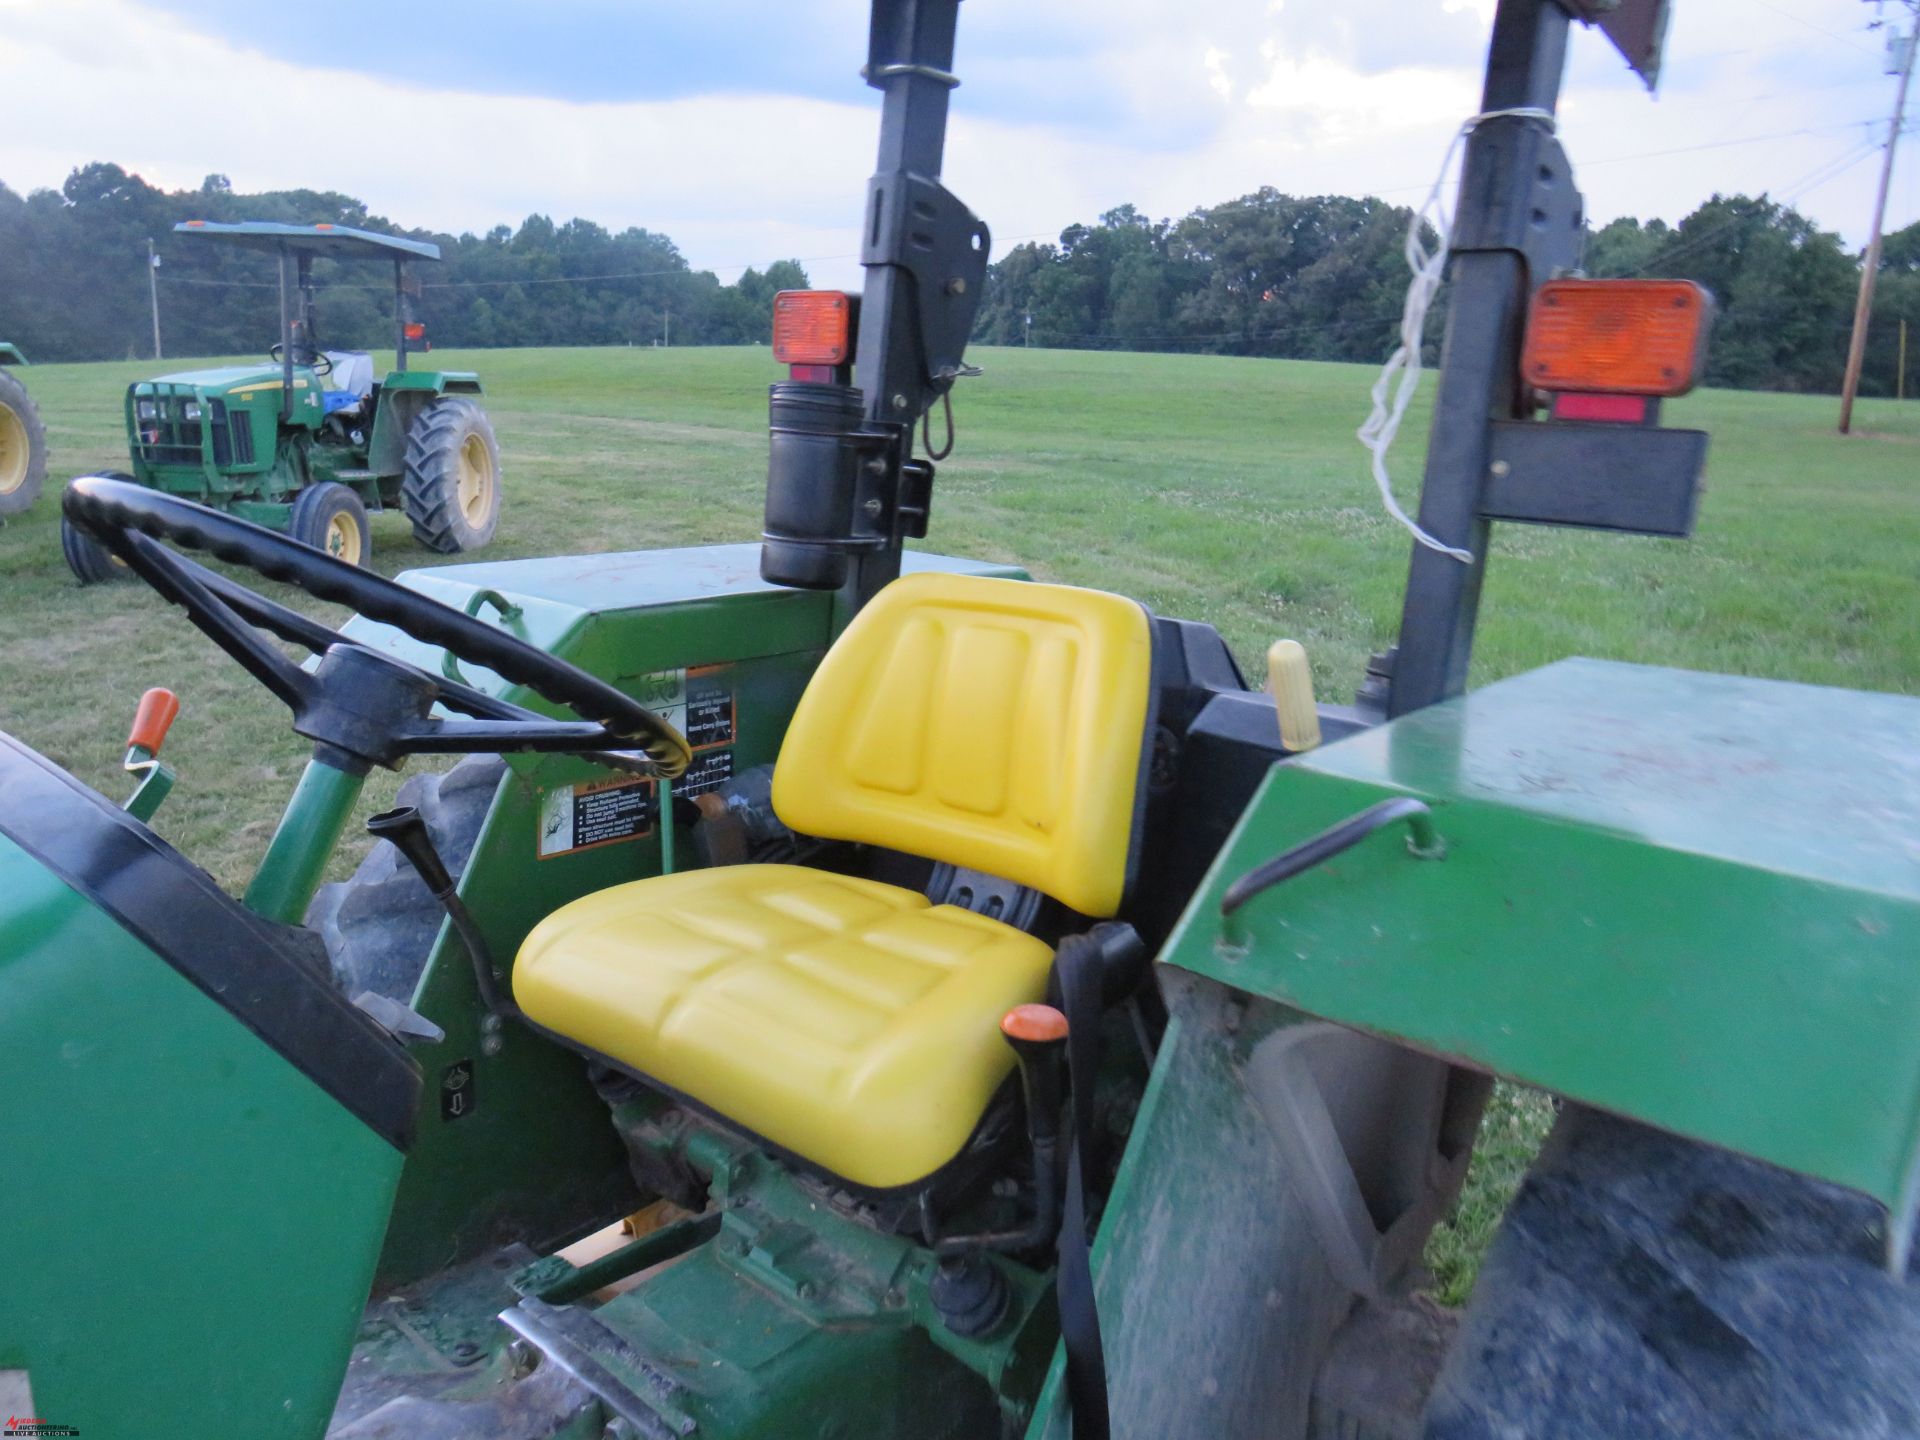 2007 JOHN DEERE 5103 TRACTOR WITH CANOPY, PTO, NO 3PT, 13.6-28 REAR TIRES, 11036 HOURS SHOWING ( - Image 6 of 8